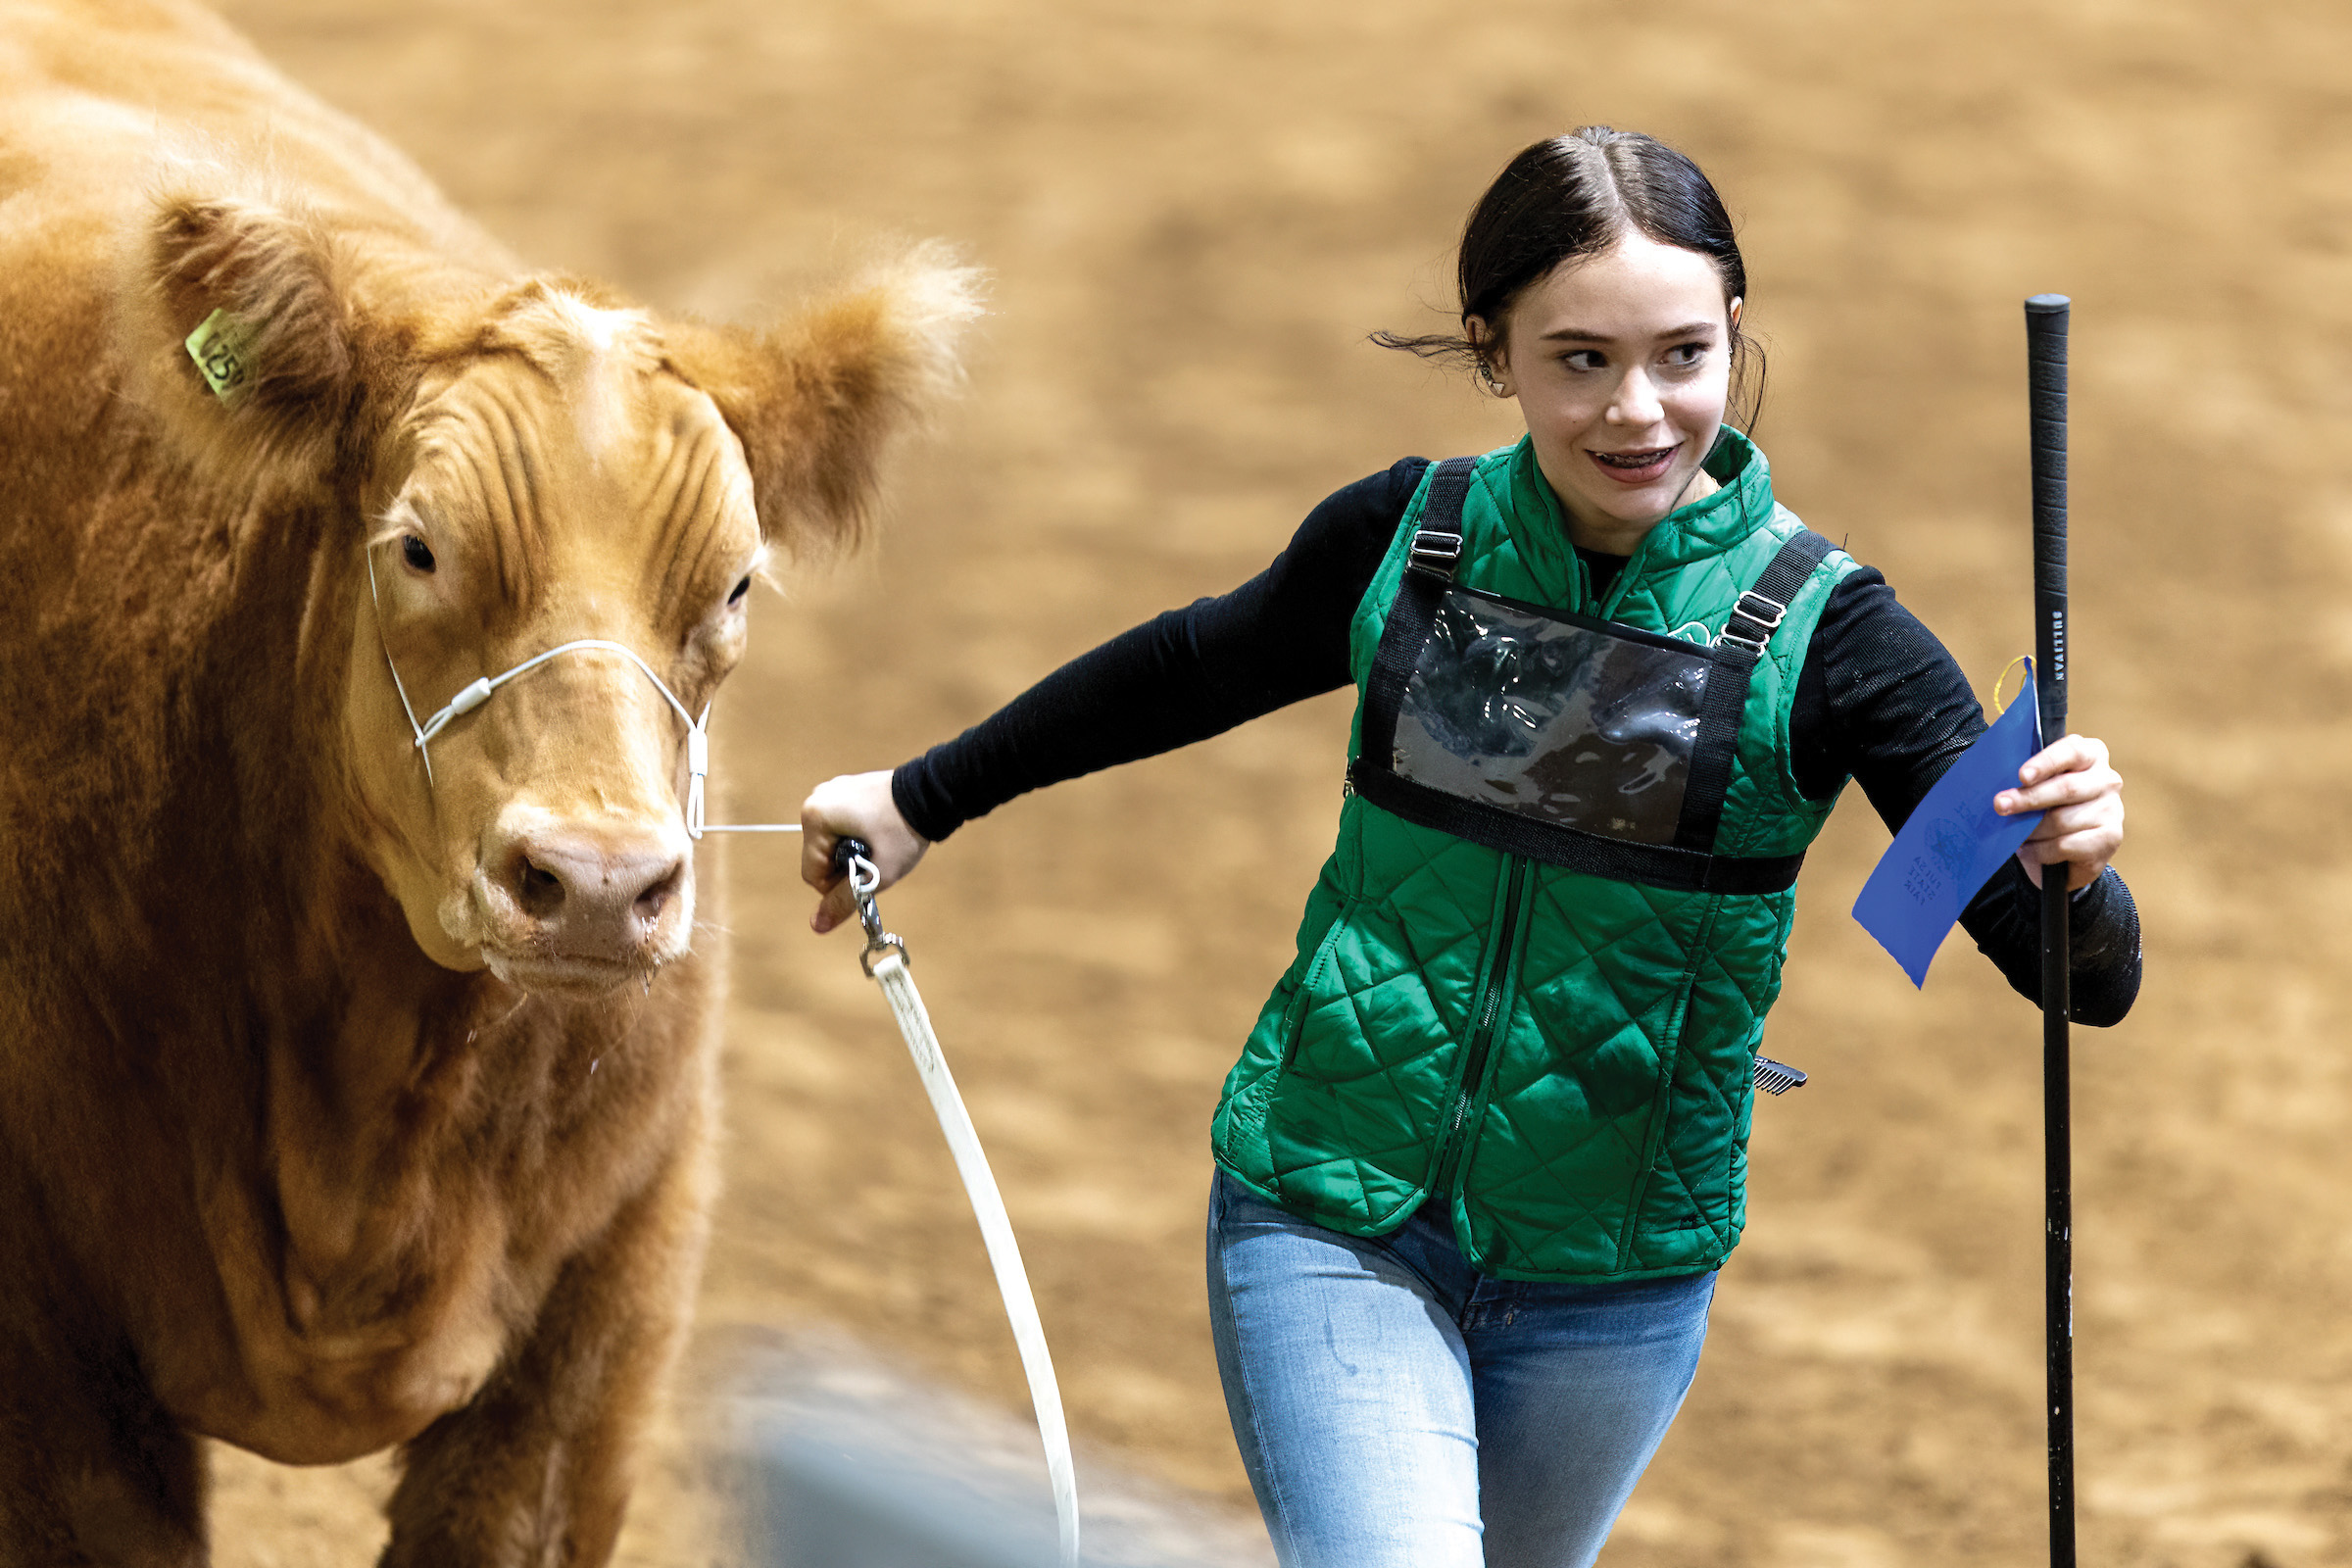 An Oklahoma 4-H member exits the show ring after exhibiting her market steer and winning a blue ribbon at the Tulsa State Fair.